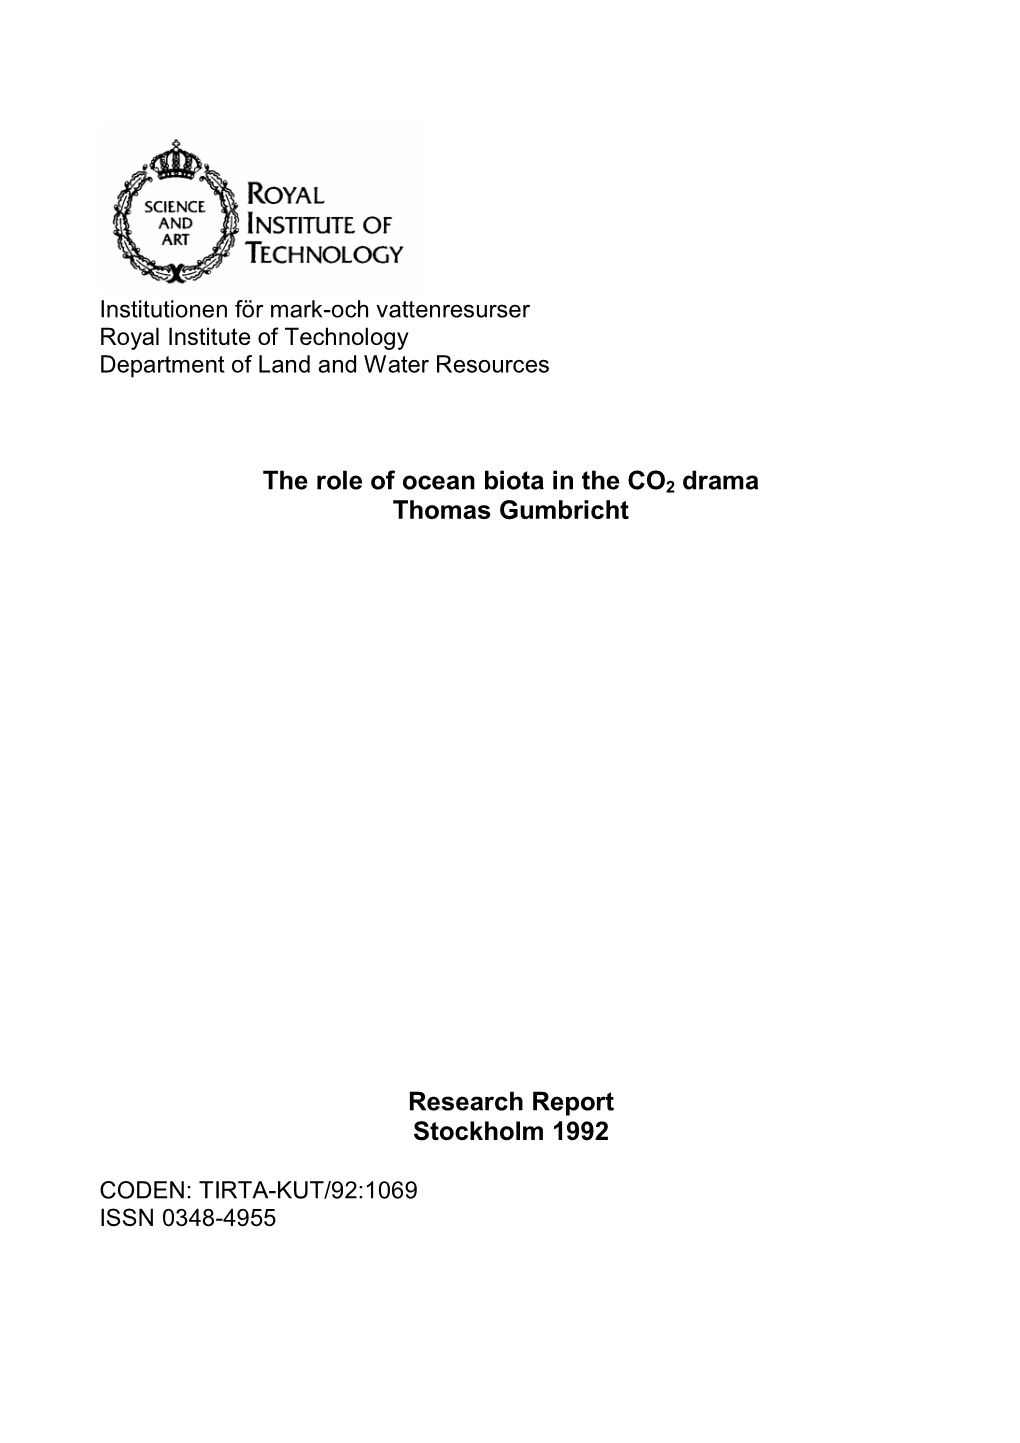 The Role of Ocean Biota in the CO2 Drama Thomas Gumbricht Research Report Stockholm 1992